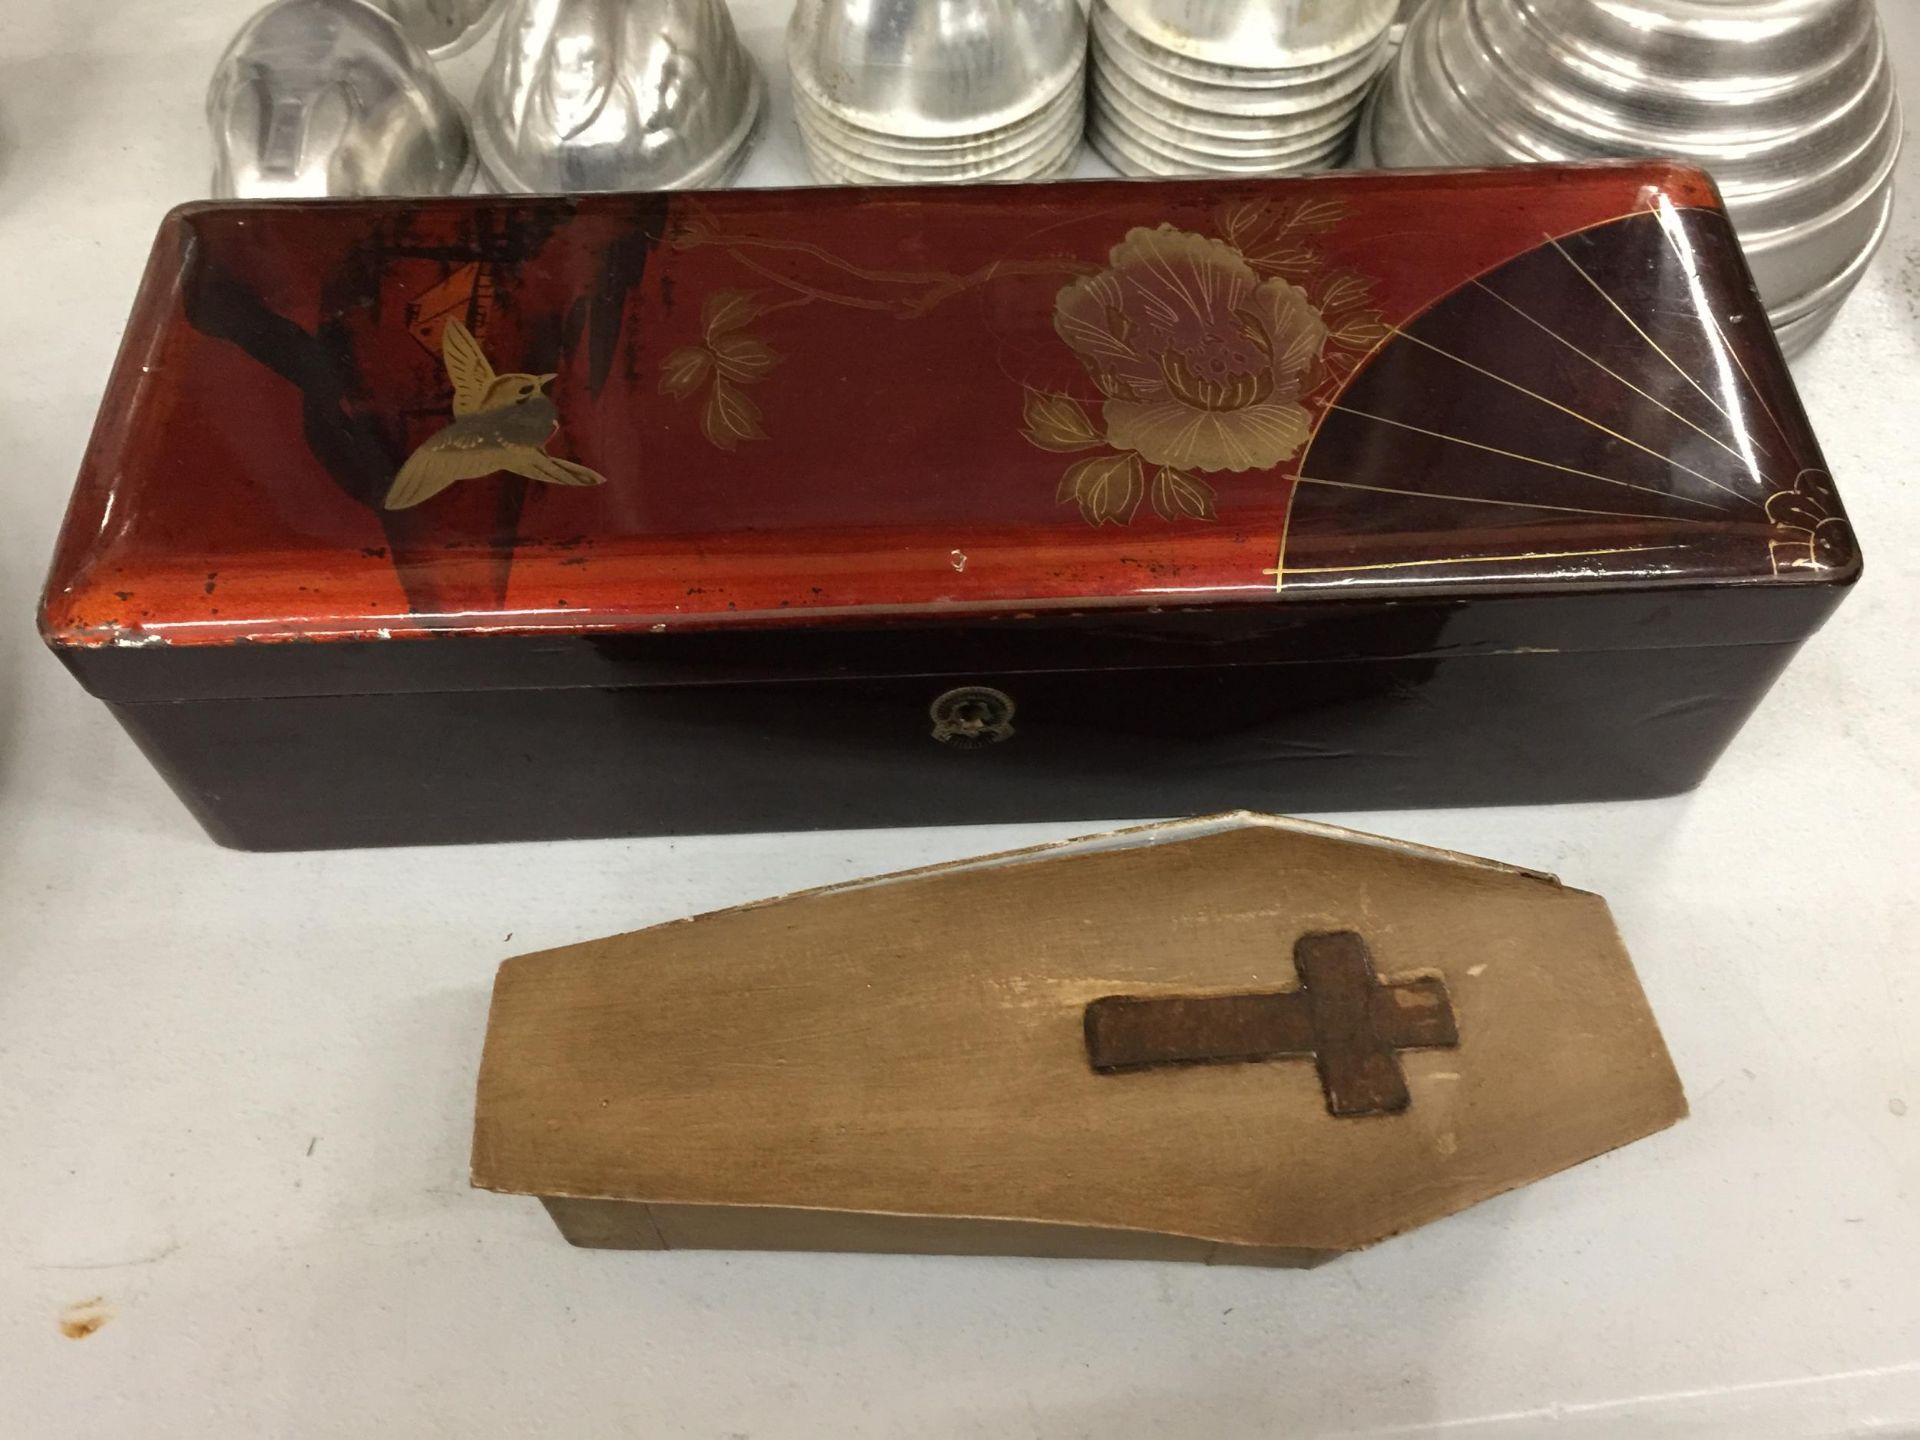 AN ORIENTAL STYLE LACQUERED GLOVE BOX PLUS A VOODOO FERTILITY DOLL IN A COFFIN